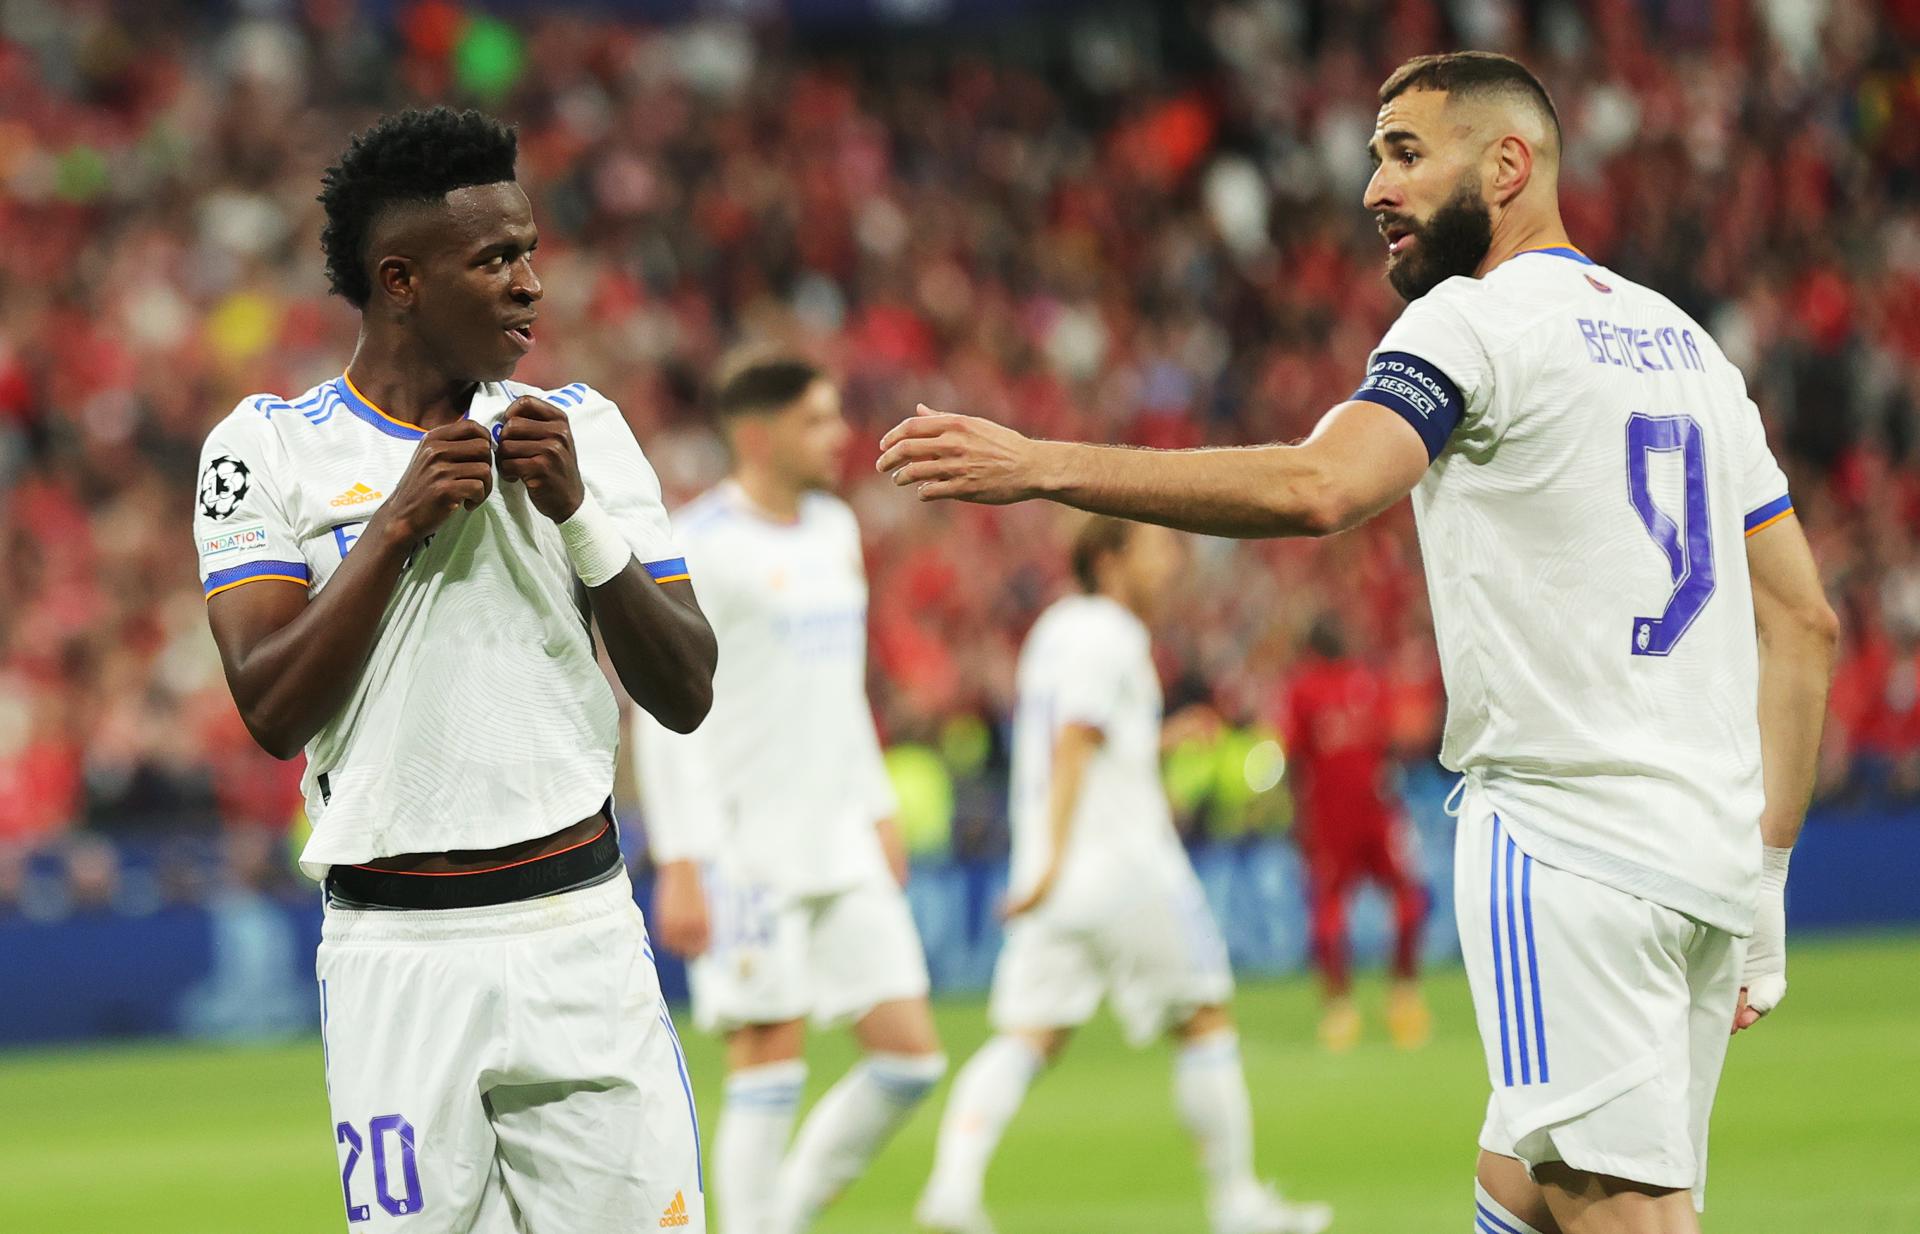 Vinicius Junior (L) of Real Madrid and teammate Karim Benzema after Vinicius scored the opening goal during the UEFA Champions League final between Liverpool FC and Real Madrid at Stade de France in Saint-Denis, near Paris, France, 28 May 2022. EFE-EPA/FRIEDEMANN VOGEL/FILE